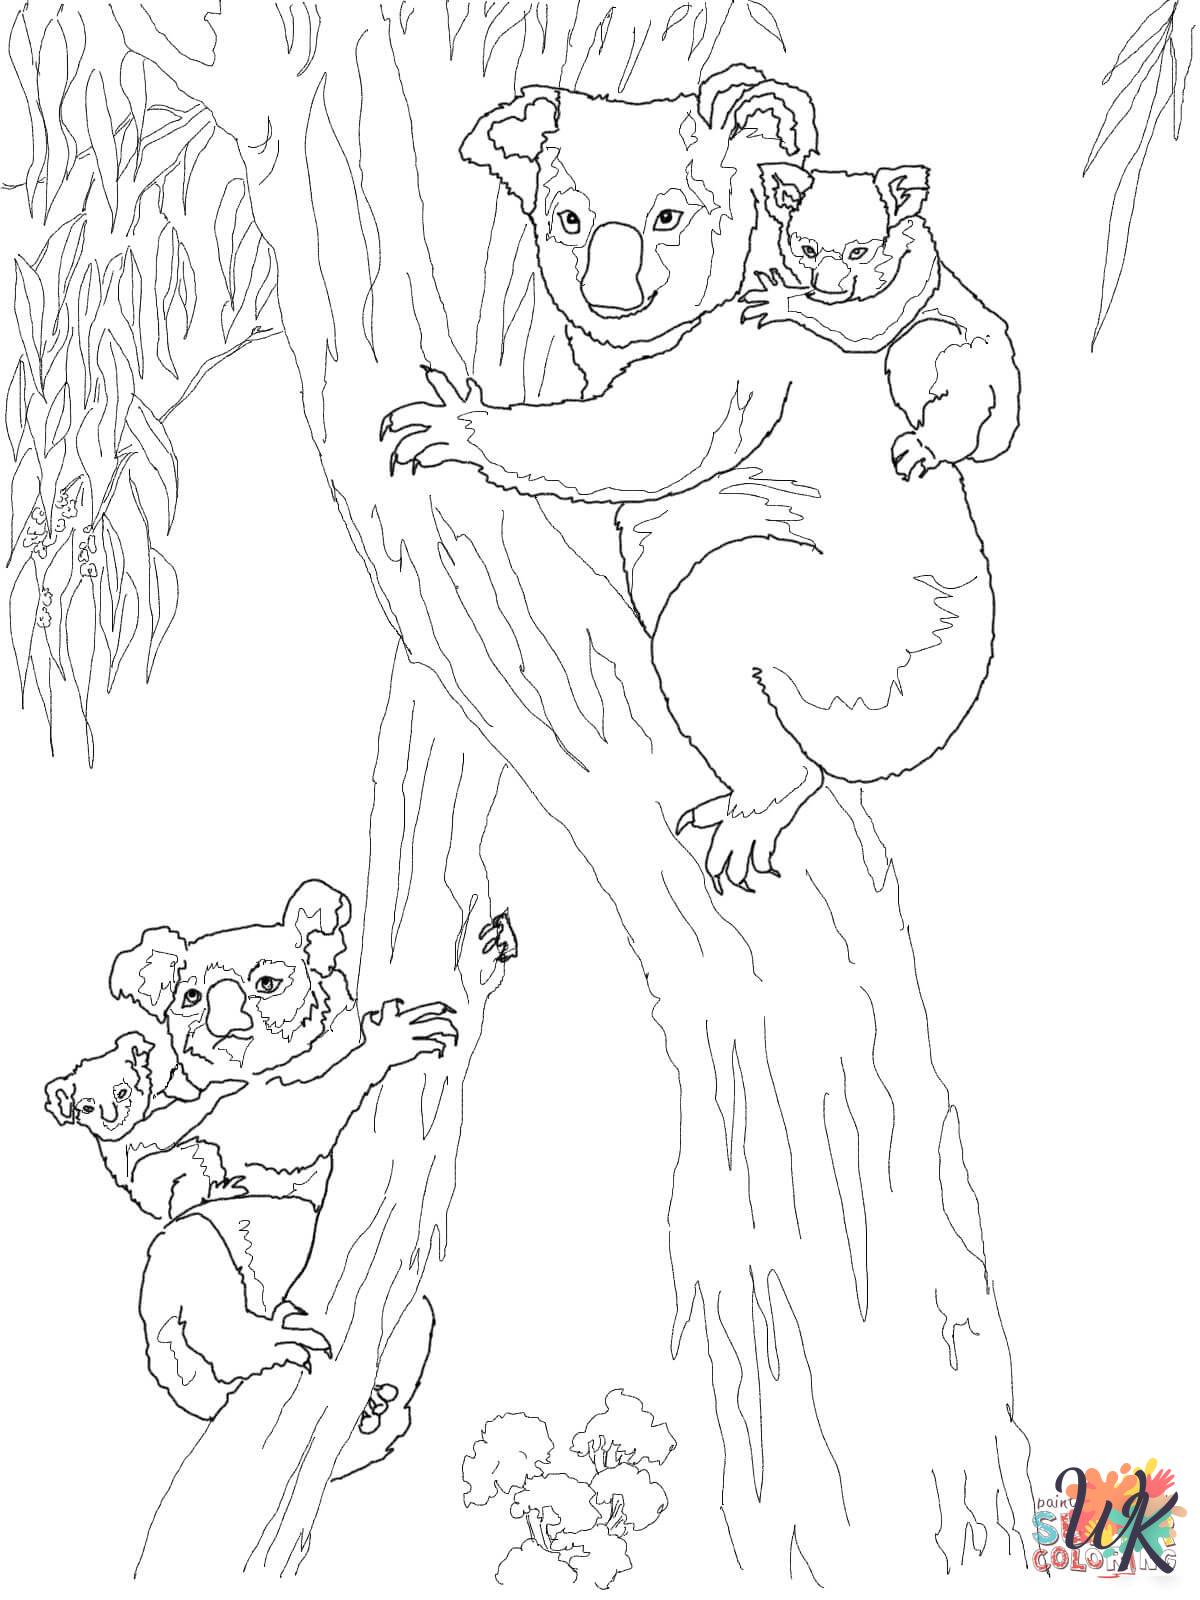 detailed Koala coloring pages for adults